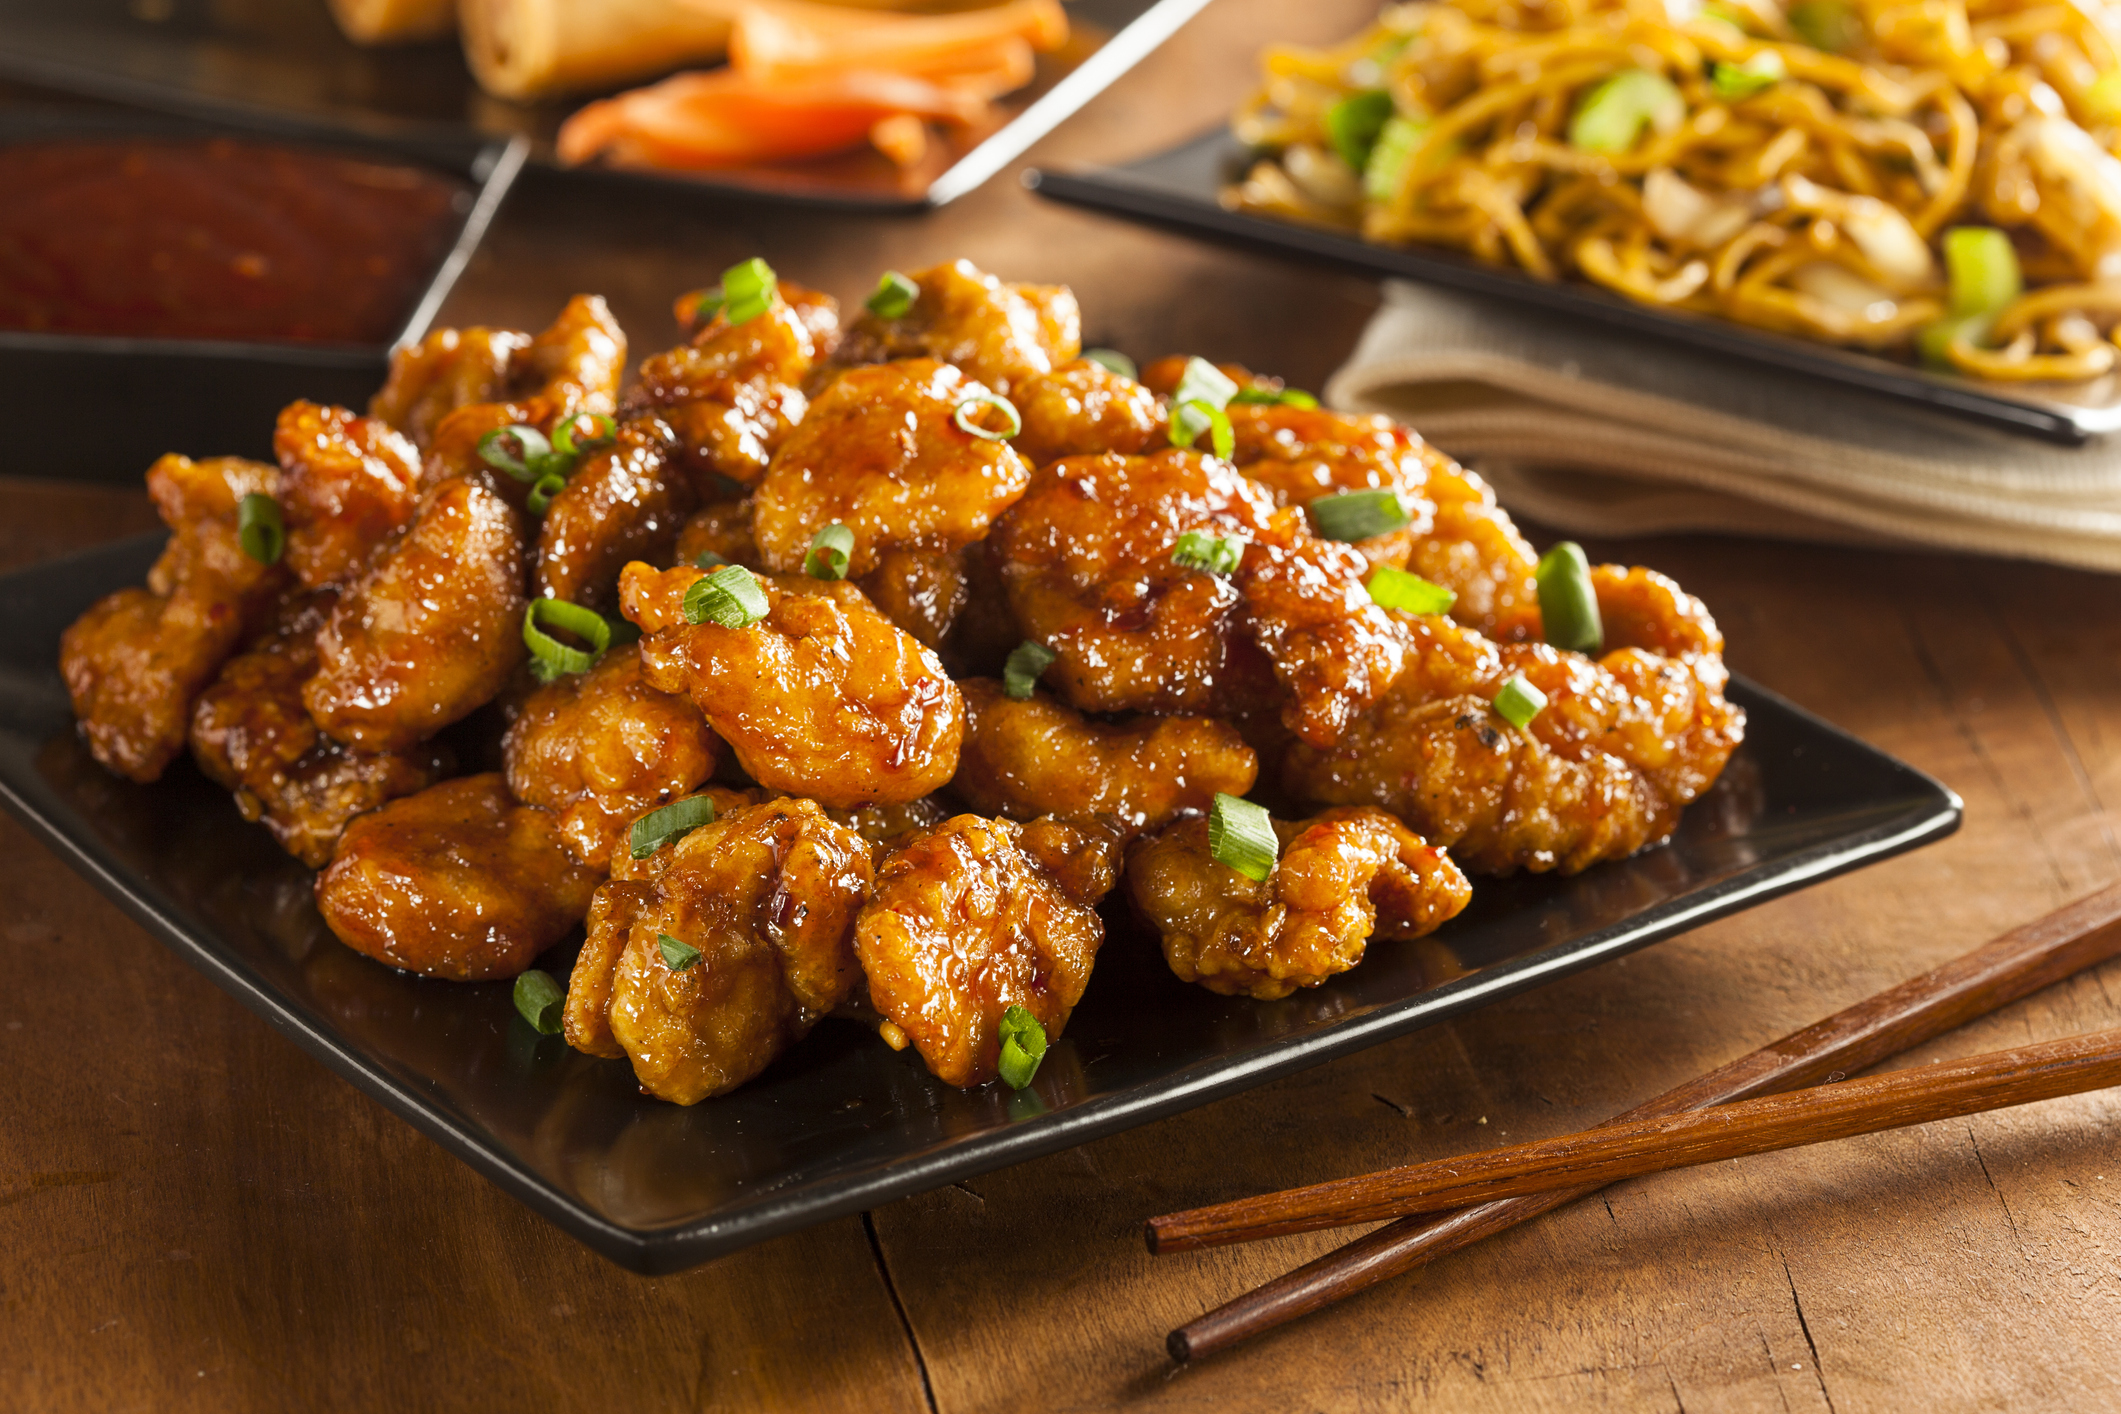 Experience the Best Chinese Food in Round Rock at Round Rock West